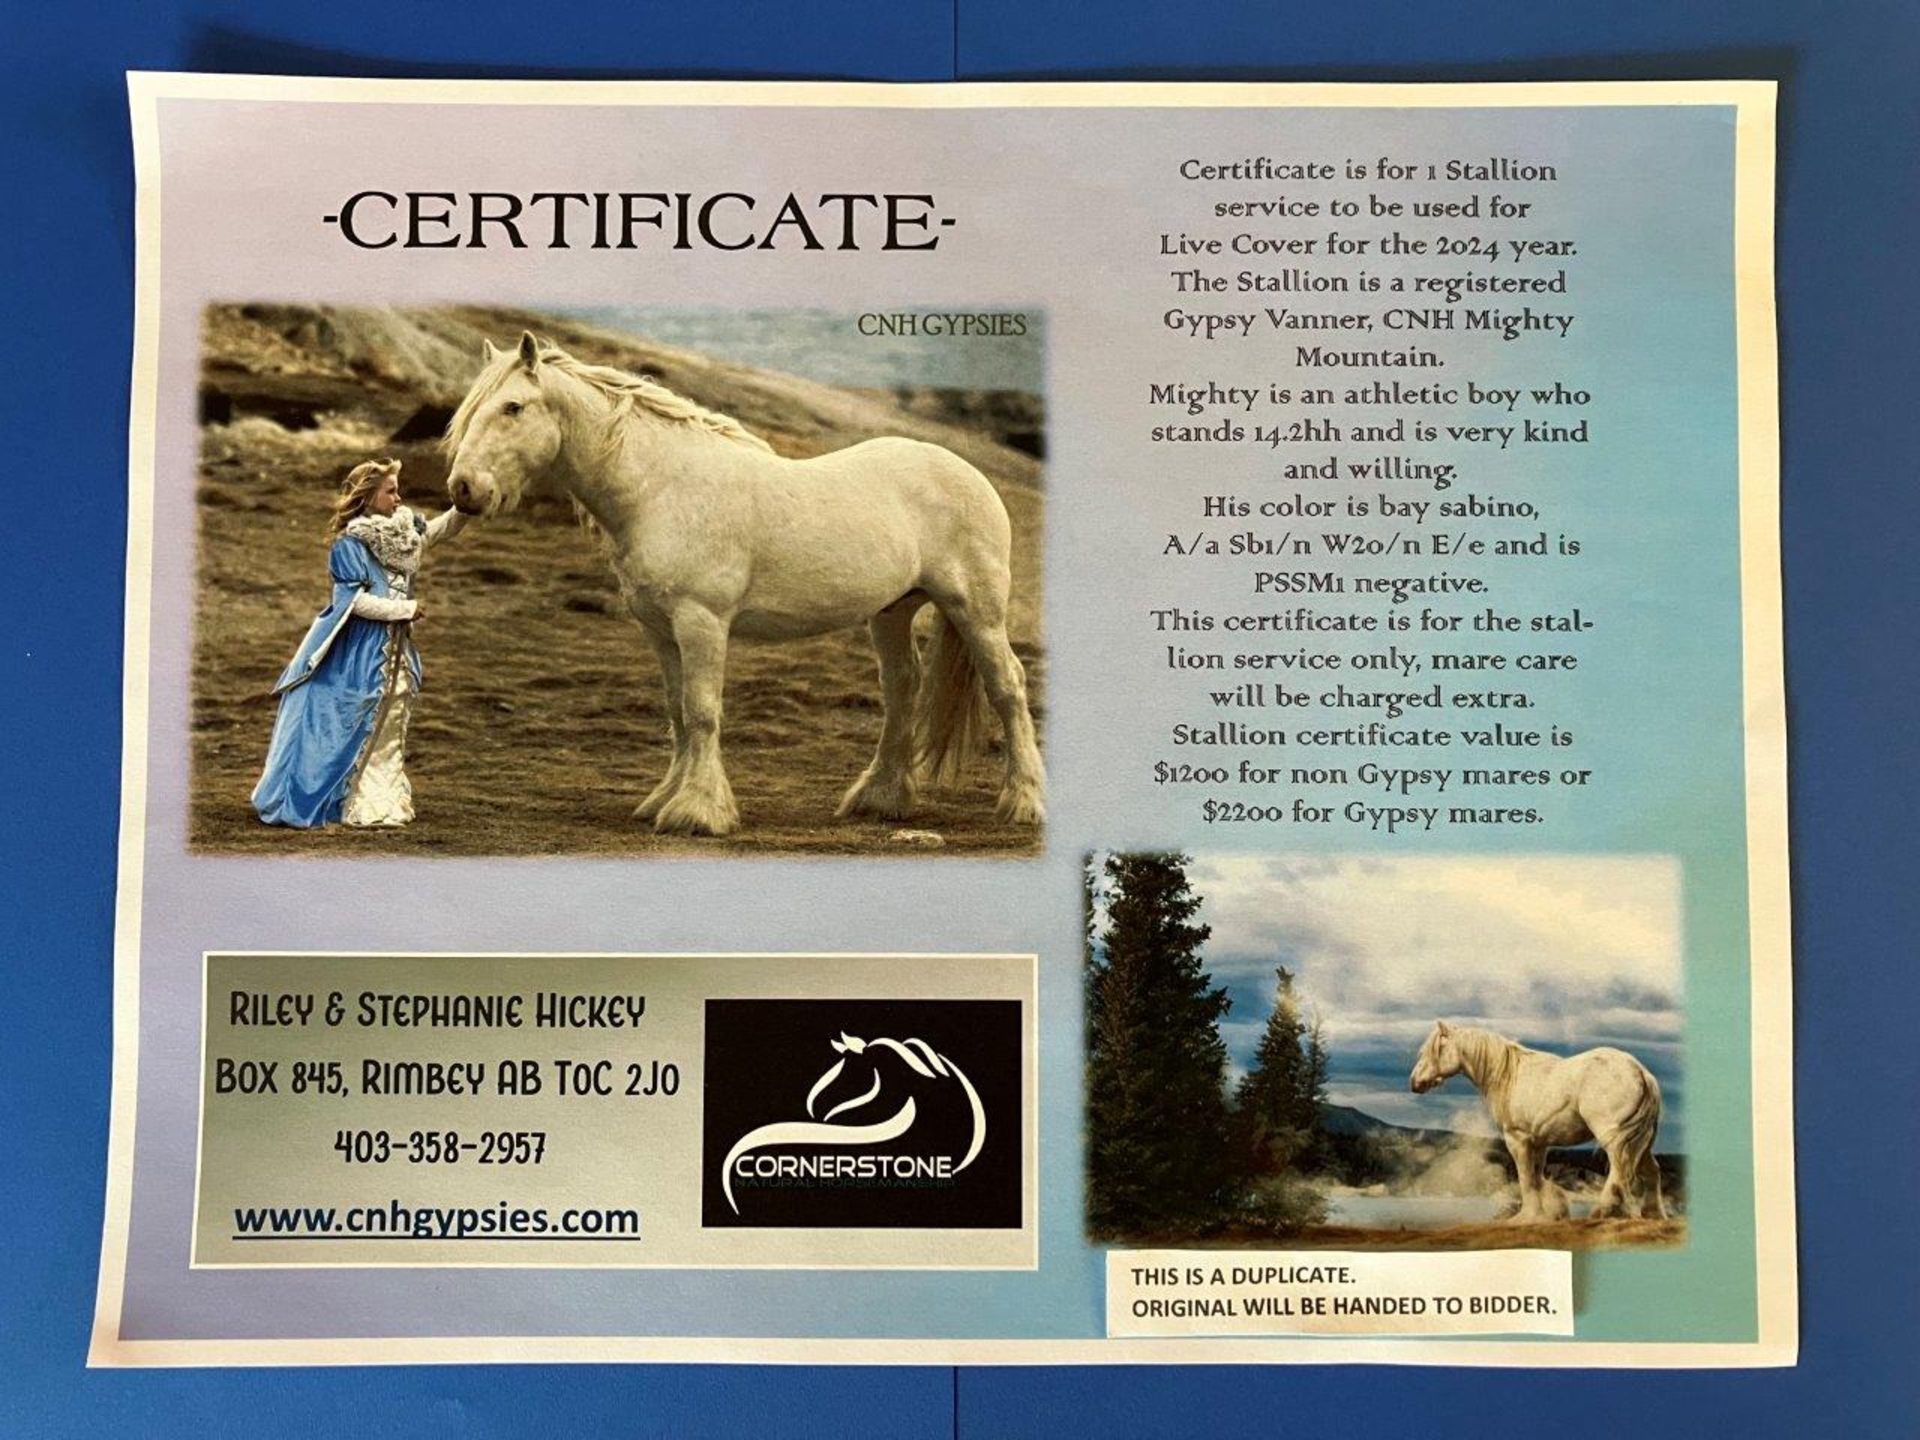 CNH GIFT CERTIFICATE FOR 1 GYPSY STALLION SERVICE (LIVE COVER )